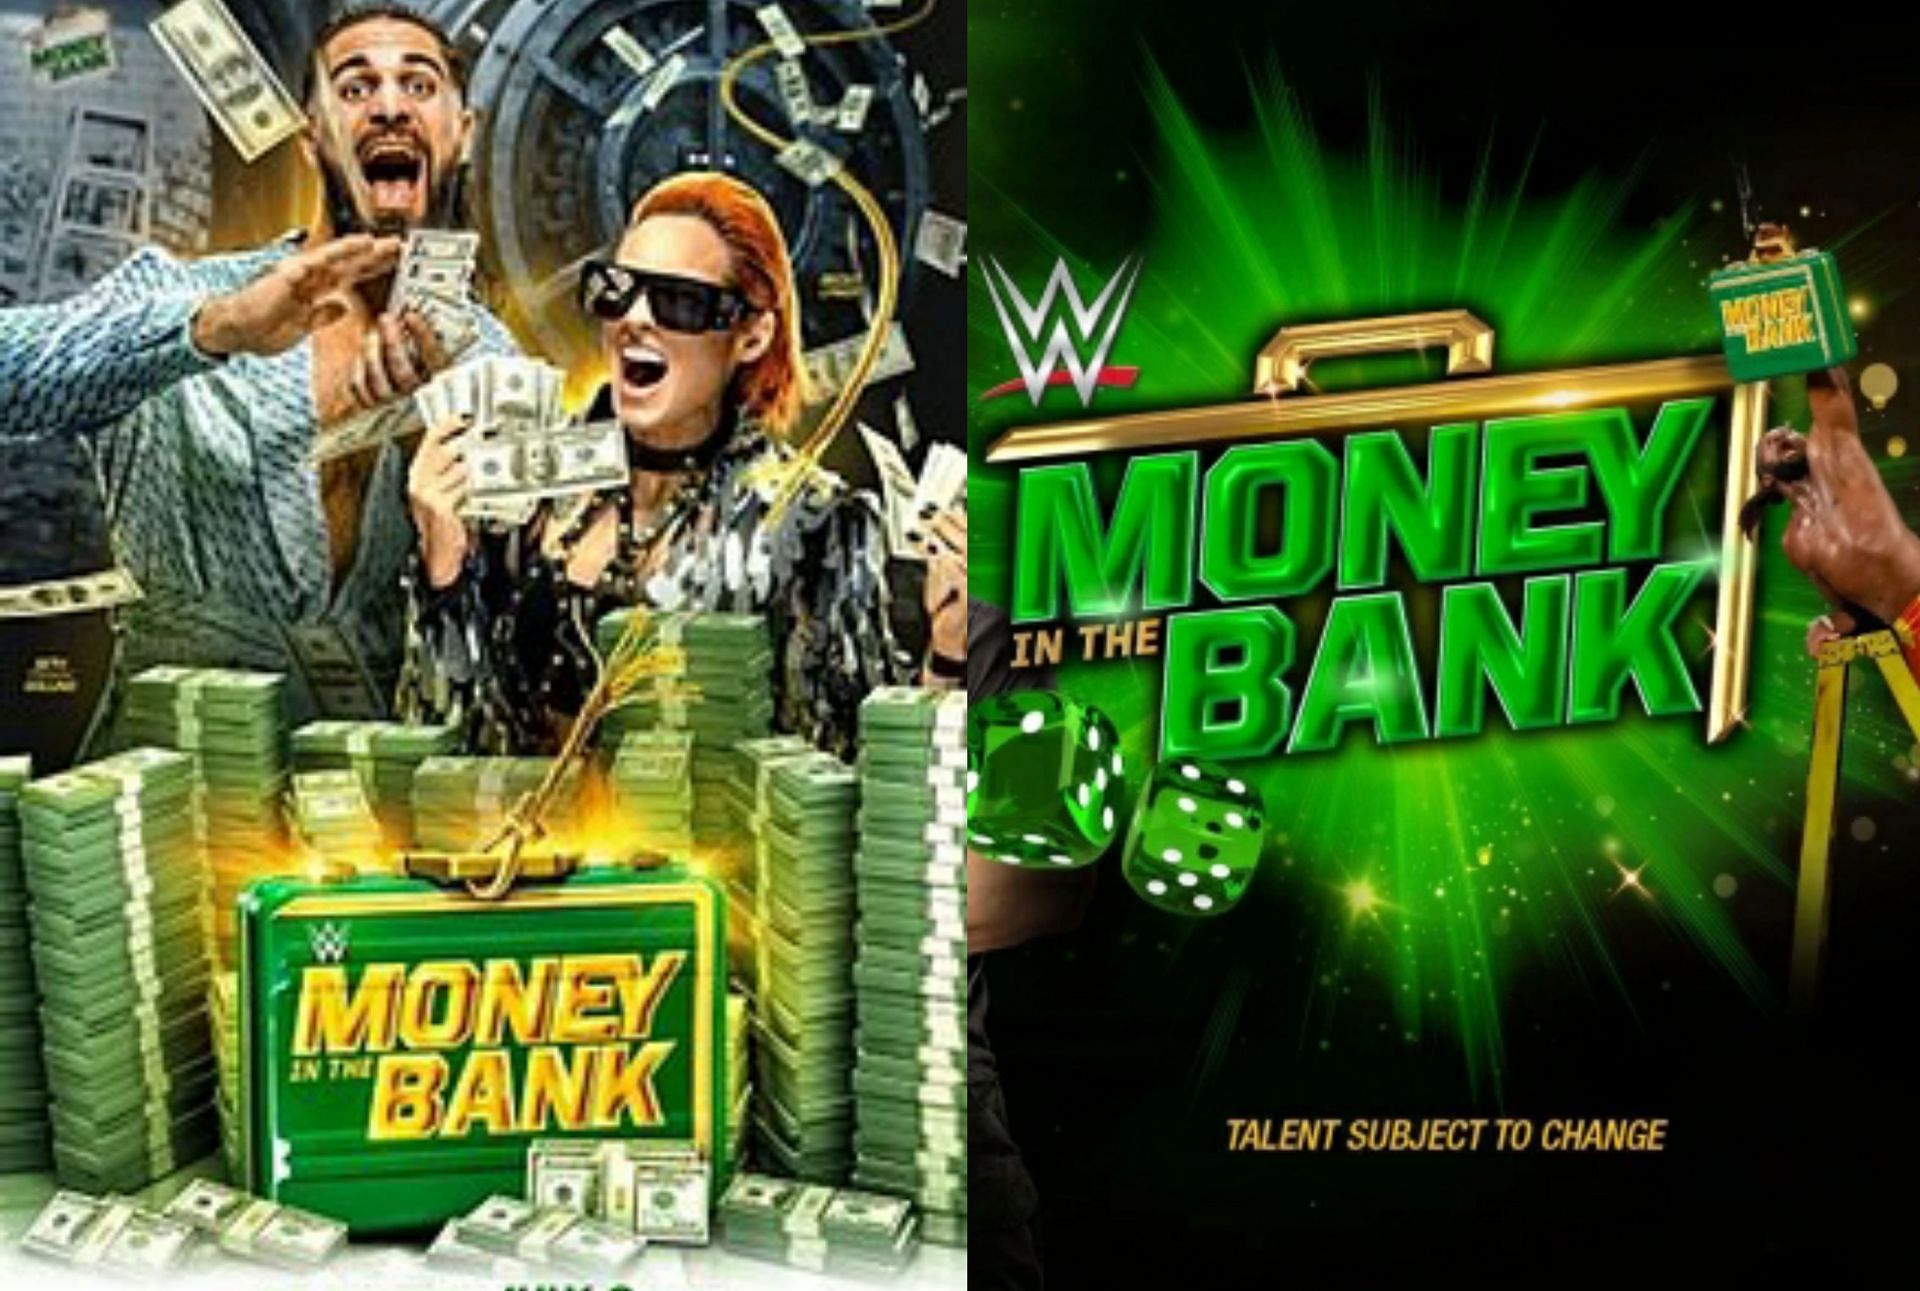 Who will become the new Mr. Money in the Bank?